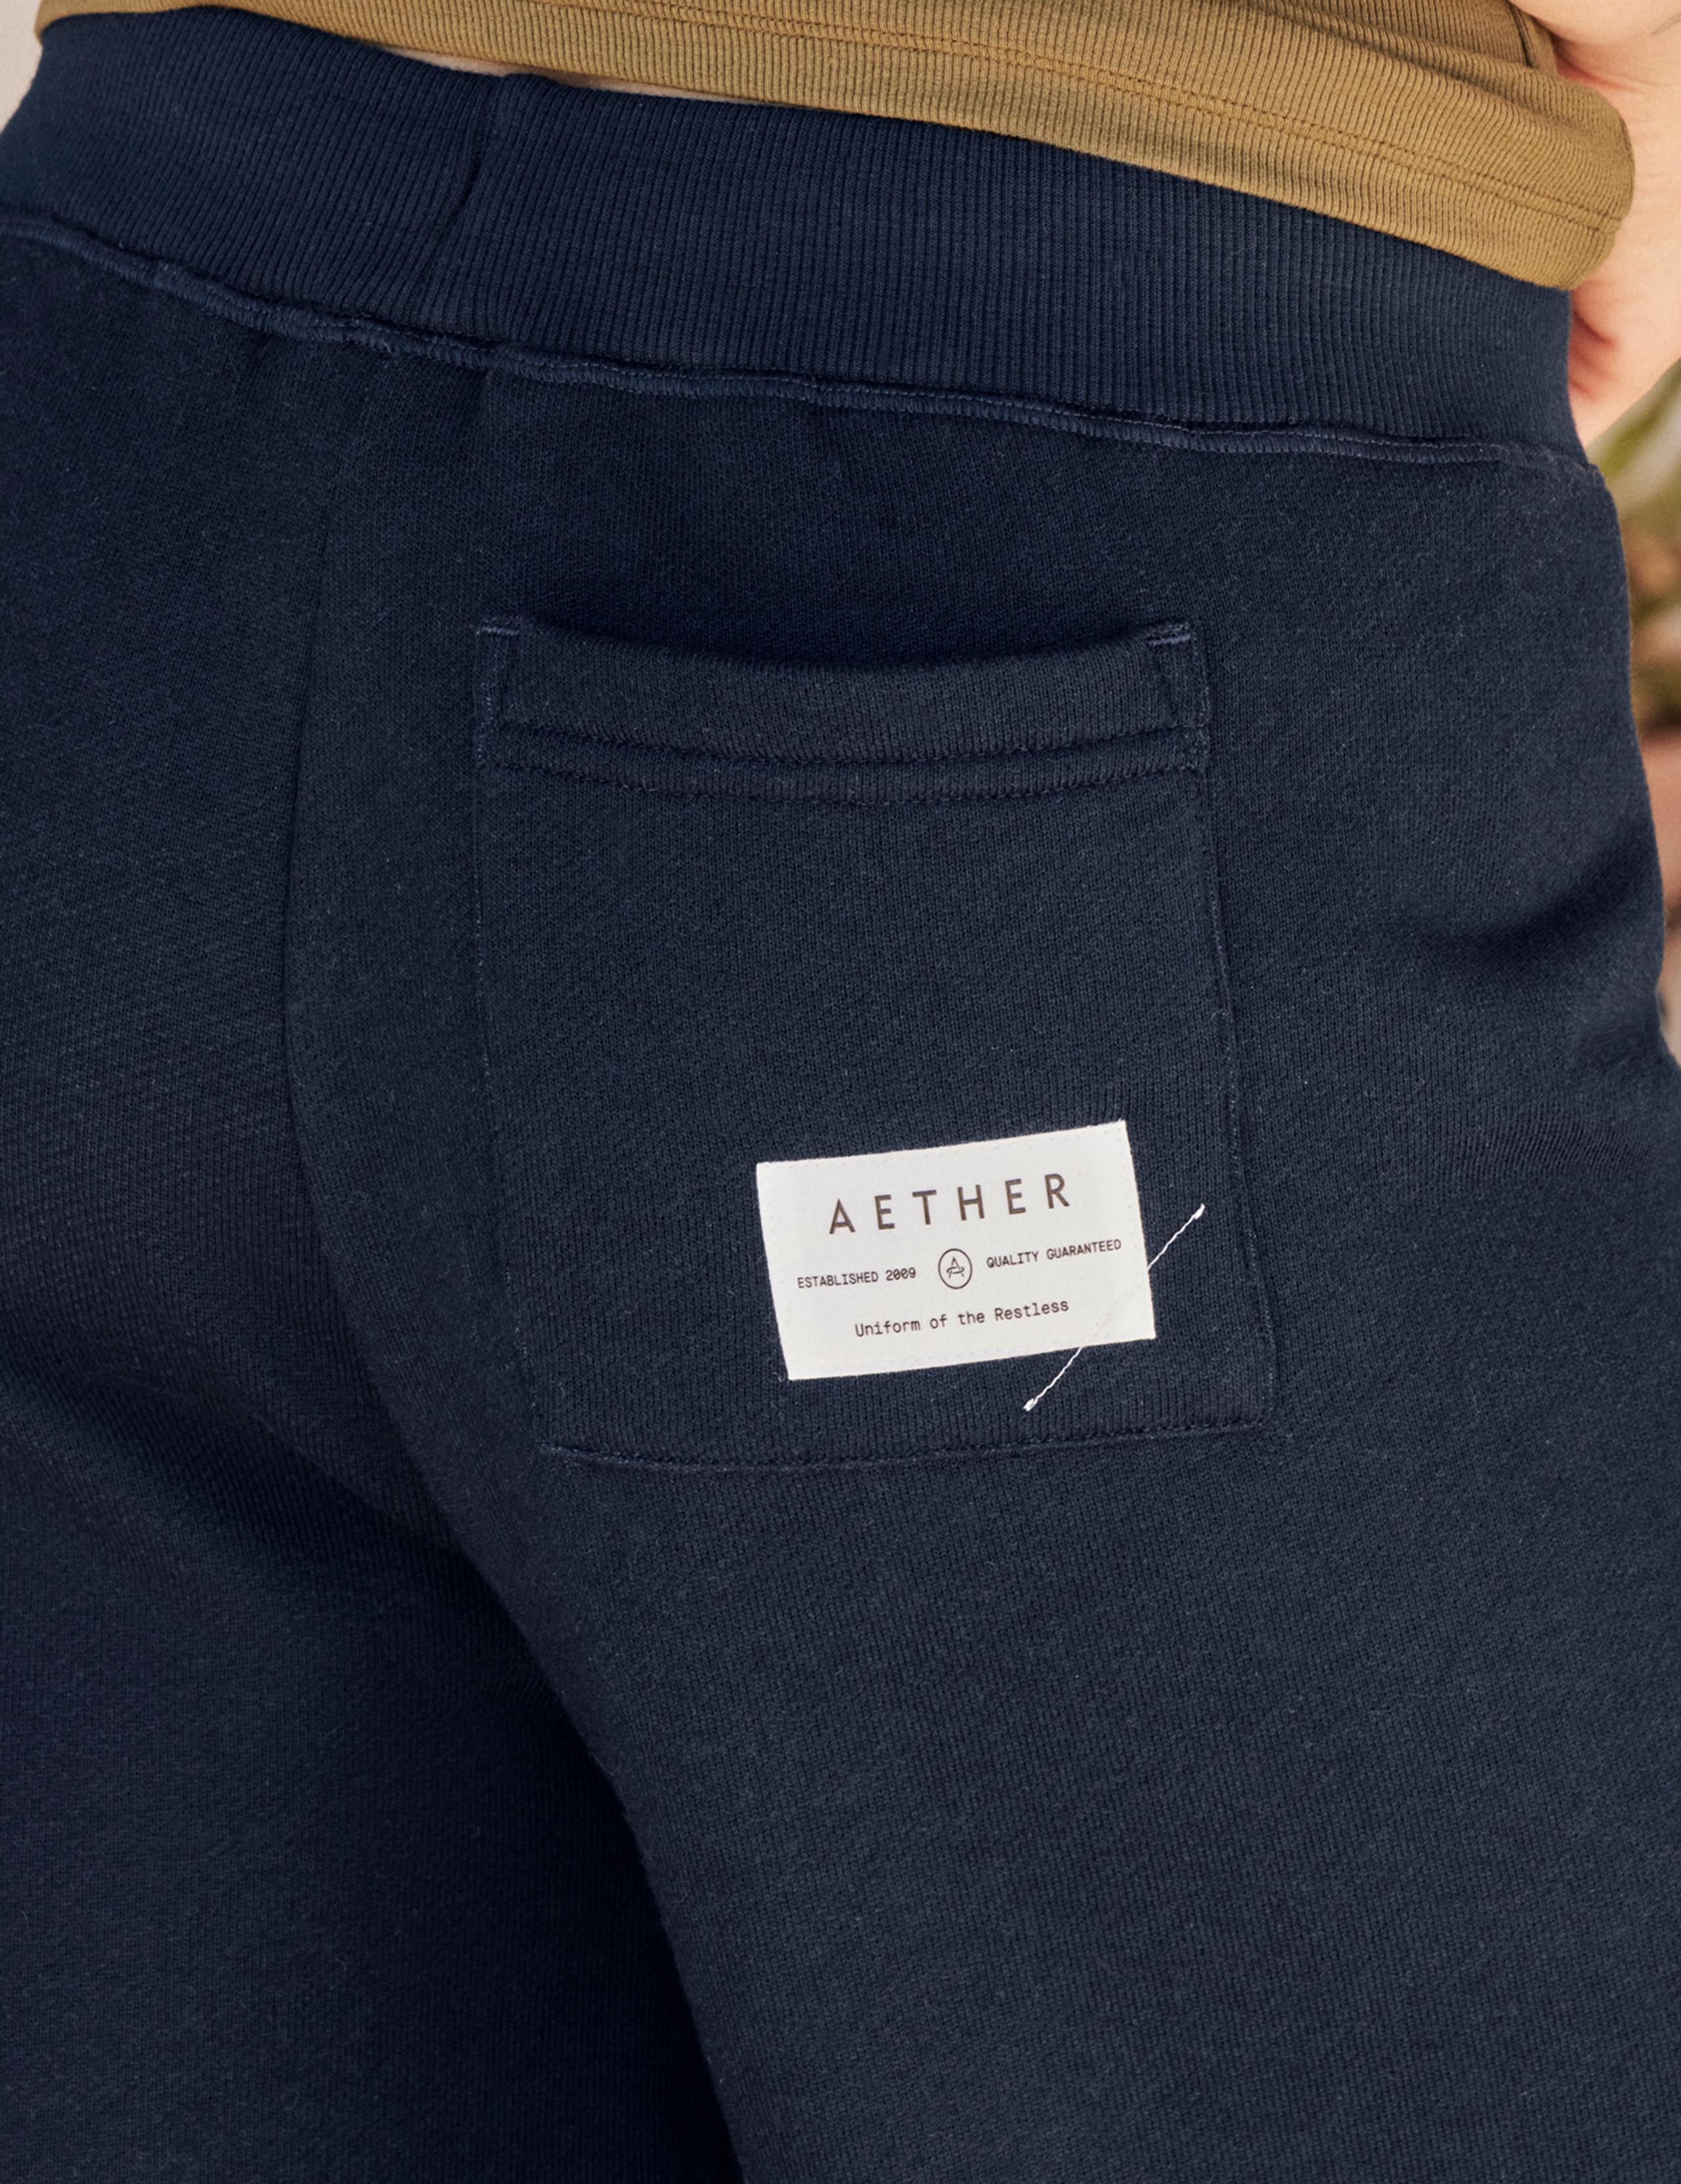 Closeup view of back pocket with AETHER woven patch label